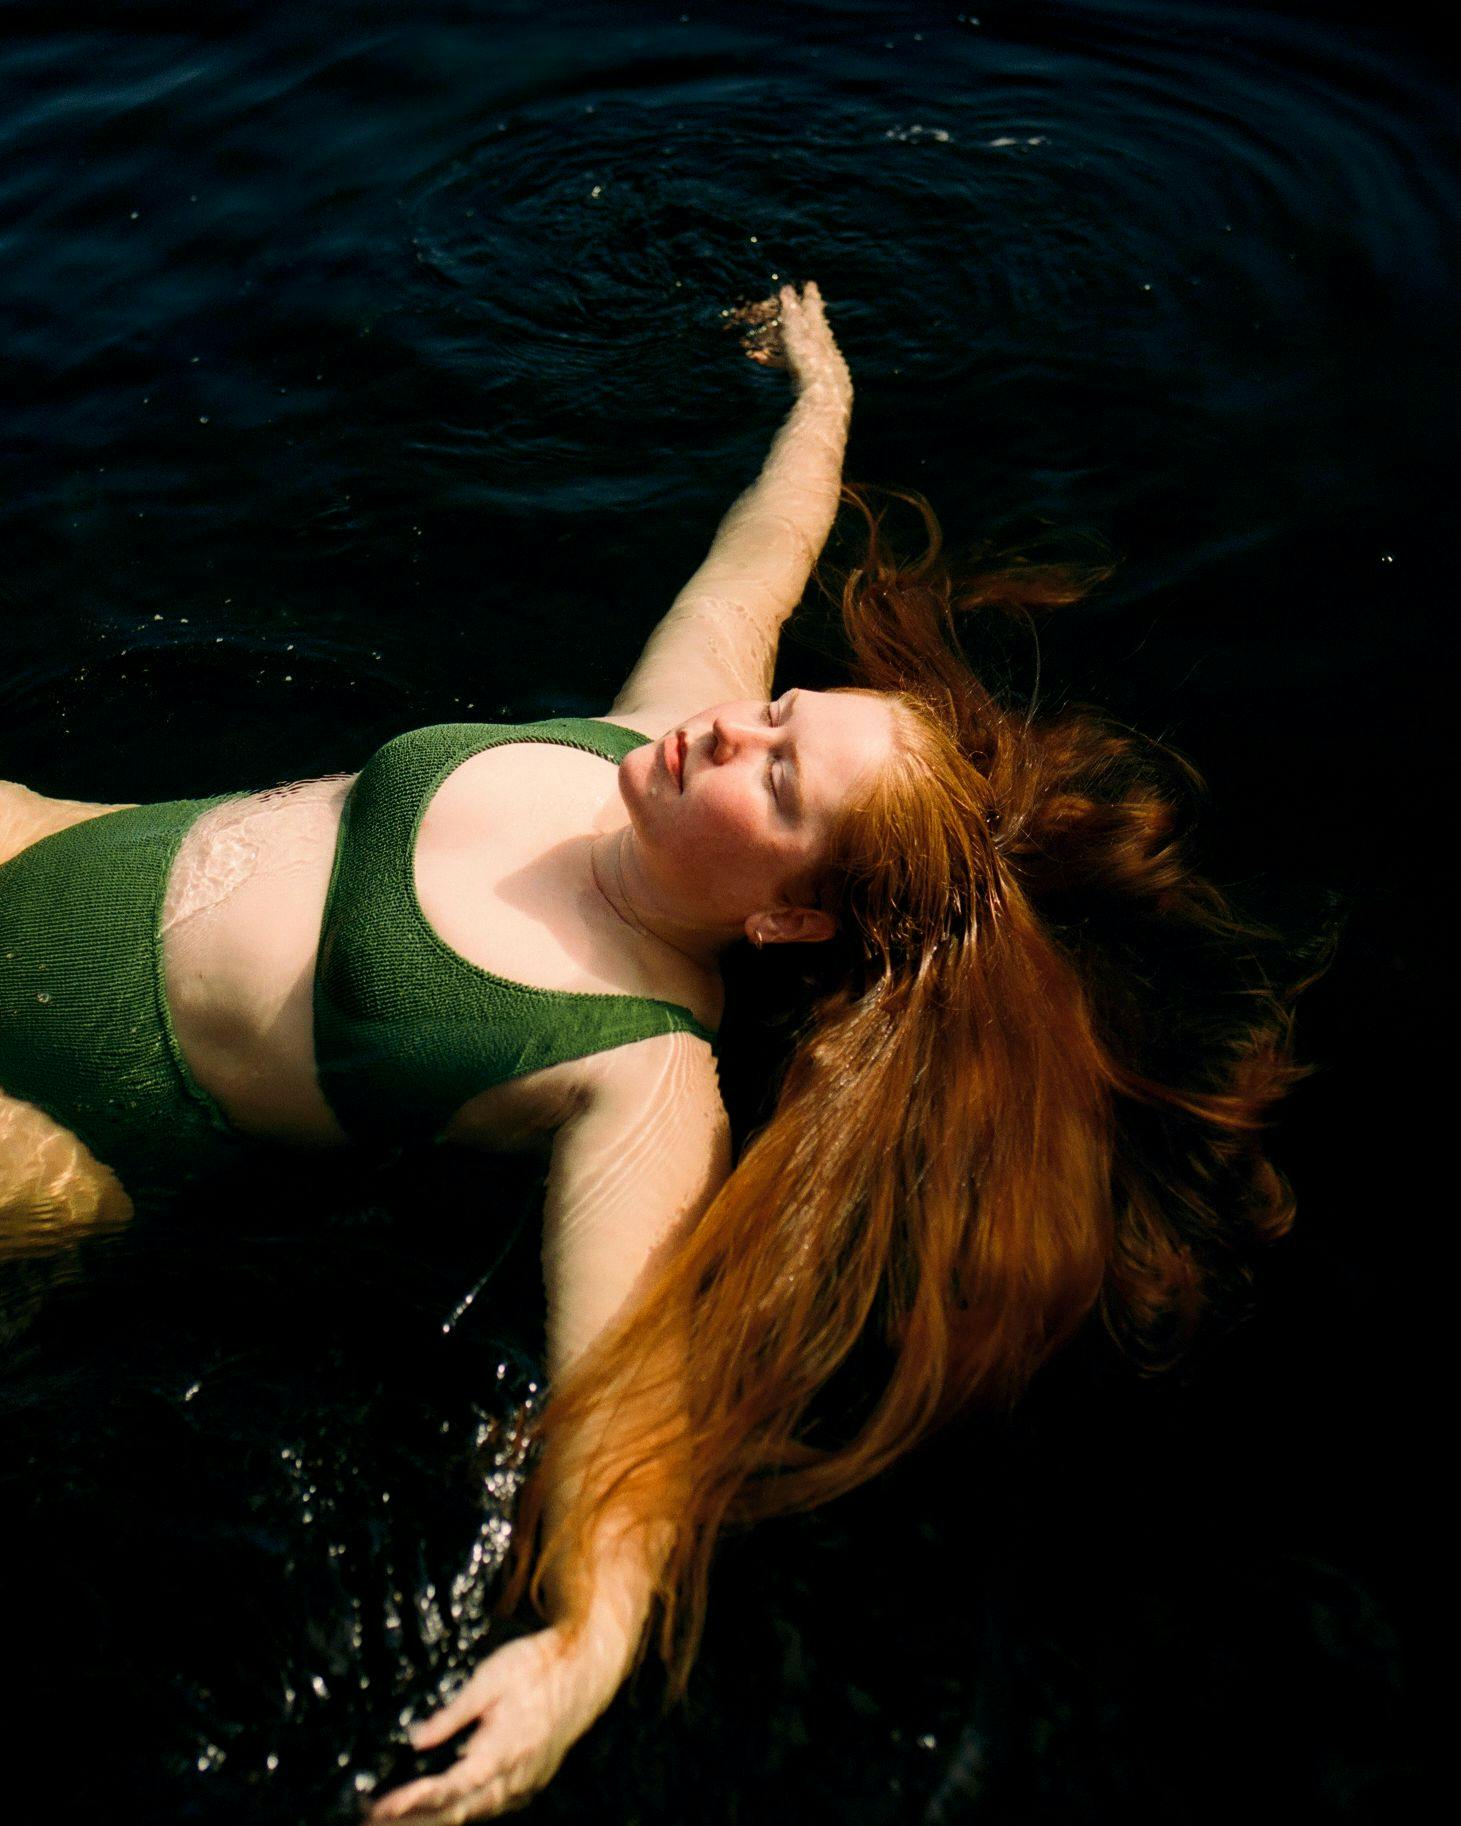 Thea floating in water